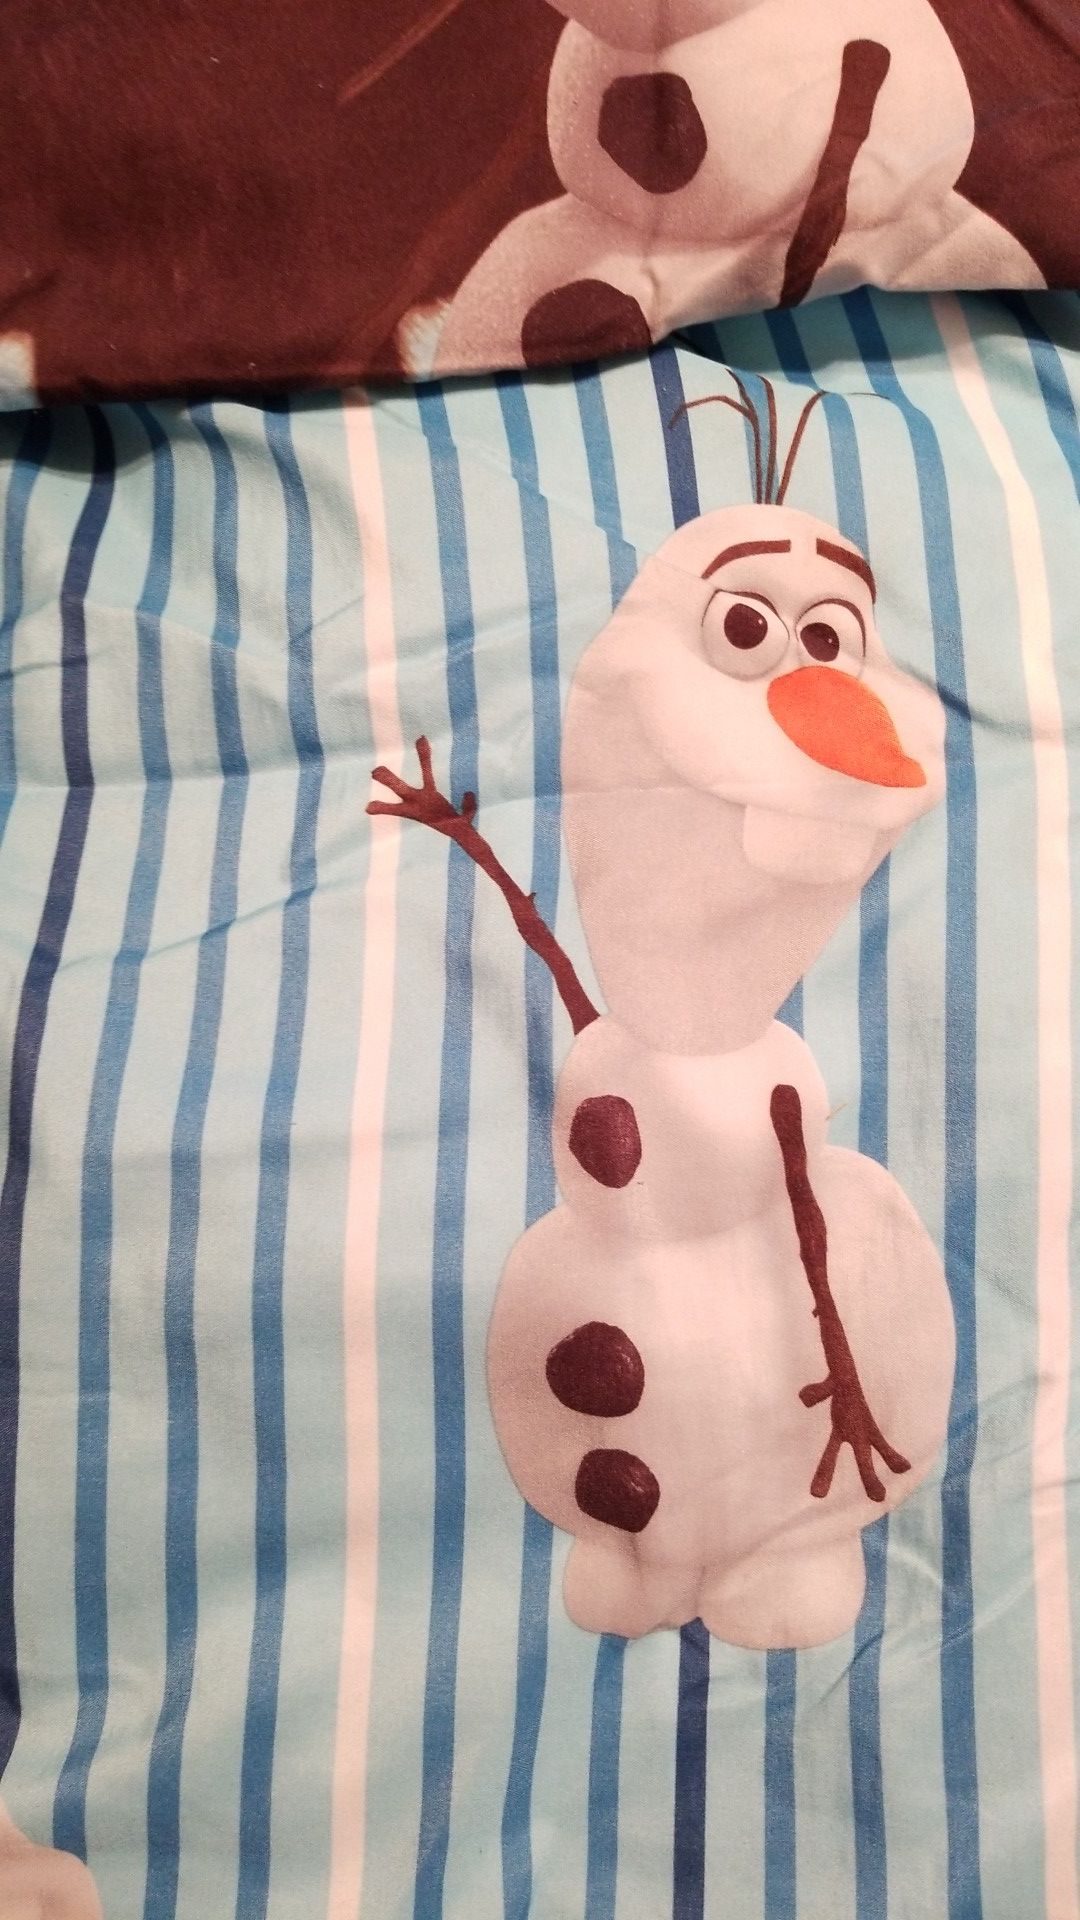 Bed Sheets, Full Size, Olaf/Frozen